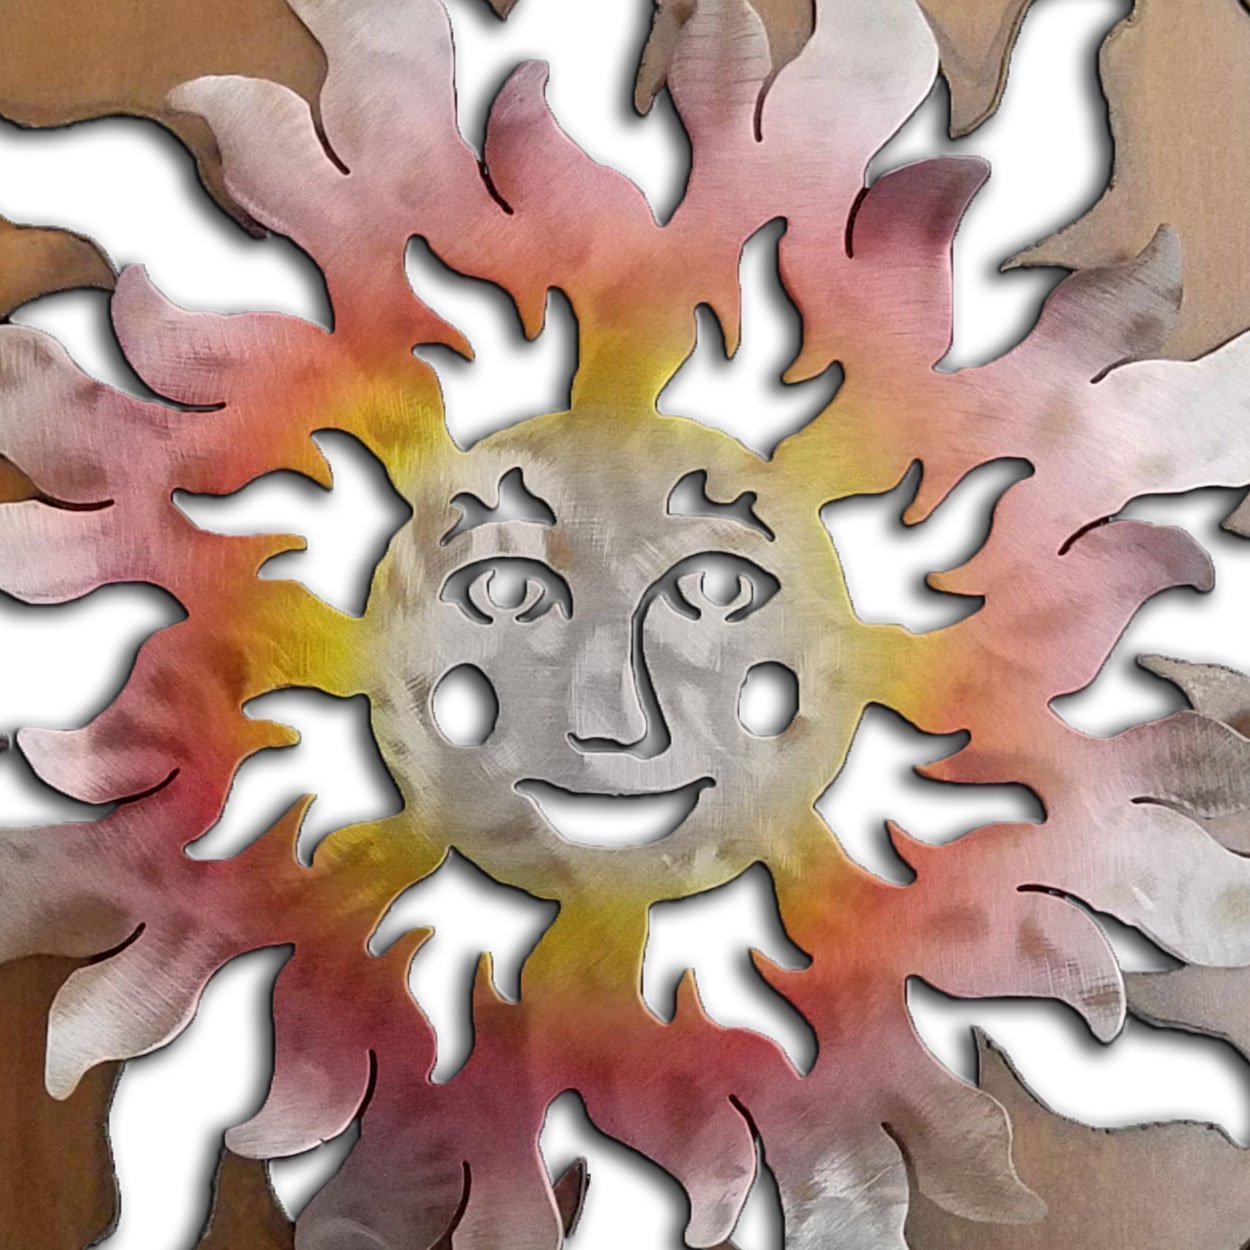 165373 - 27-inch large Happy Face Sun Panel 3D Metal Wall Art in a vibrant sunset swirl finish